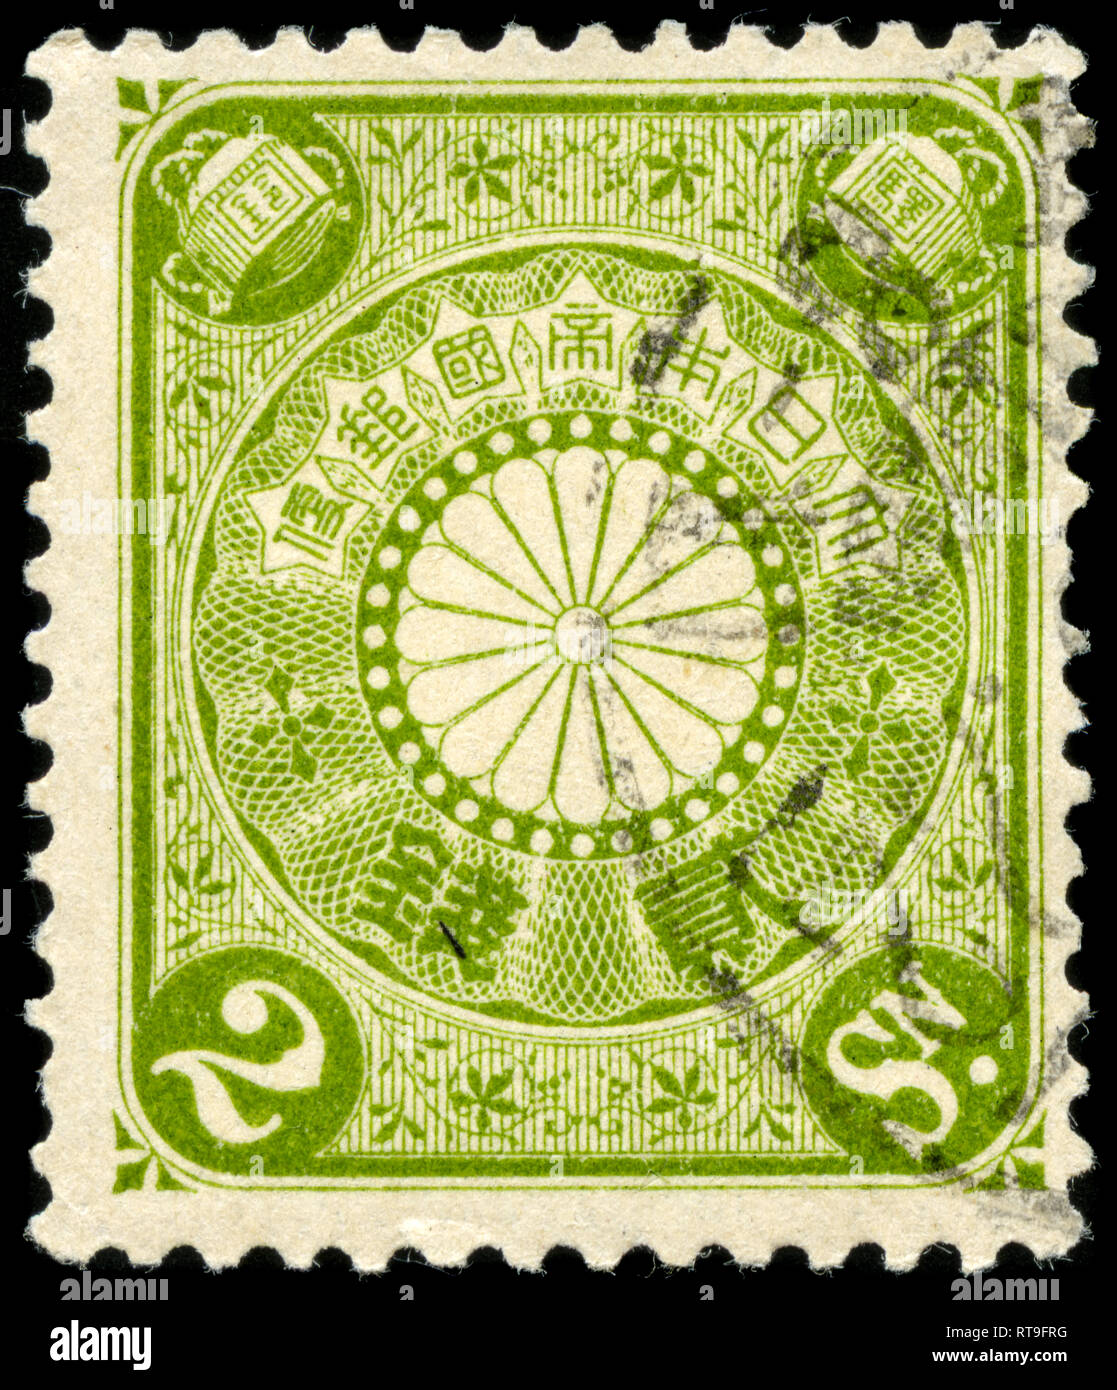 Postage stamp from Japan in the Chrysanthemum (1899-1907) series 